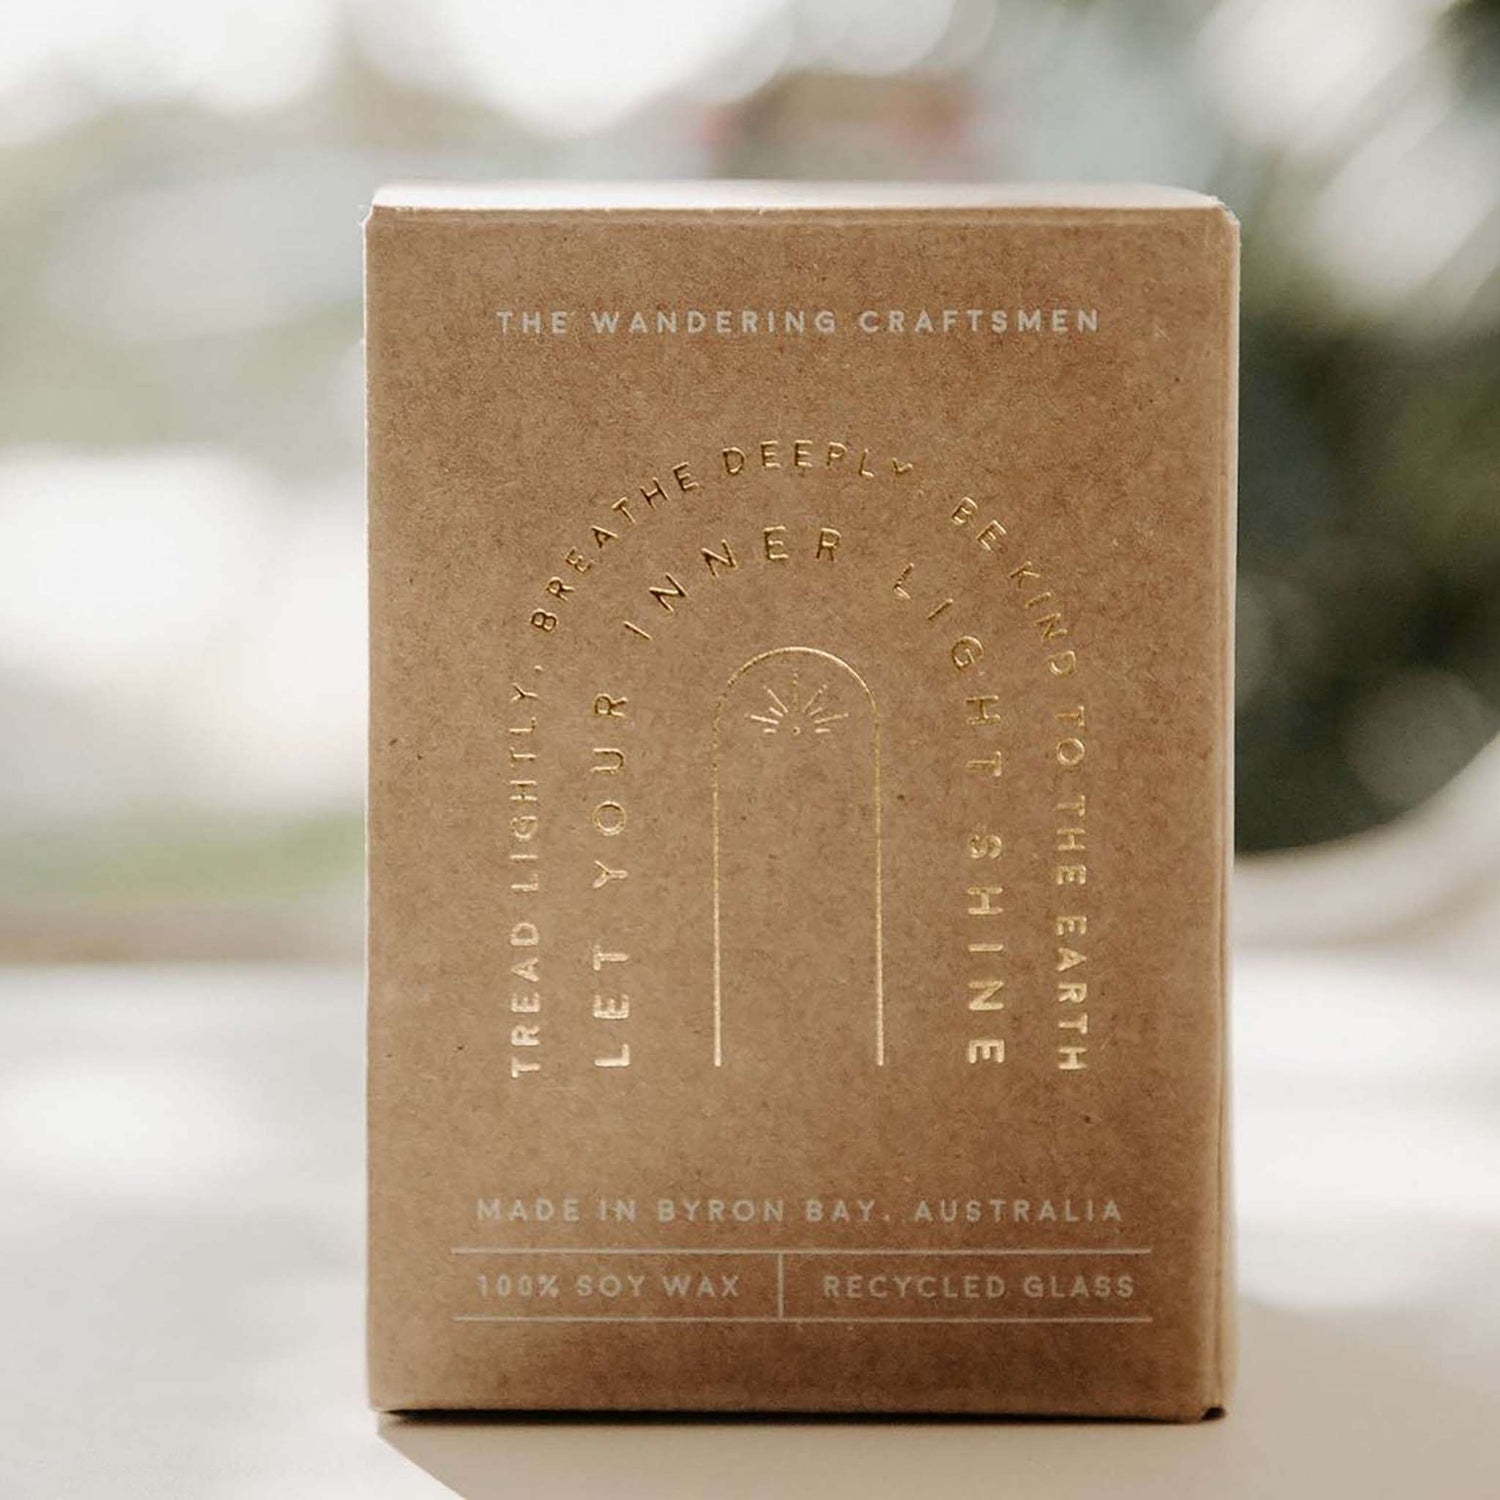 The wandering craftsmen candle in kraft gift box with gold writing.